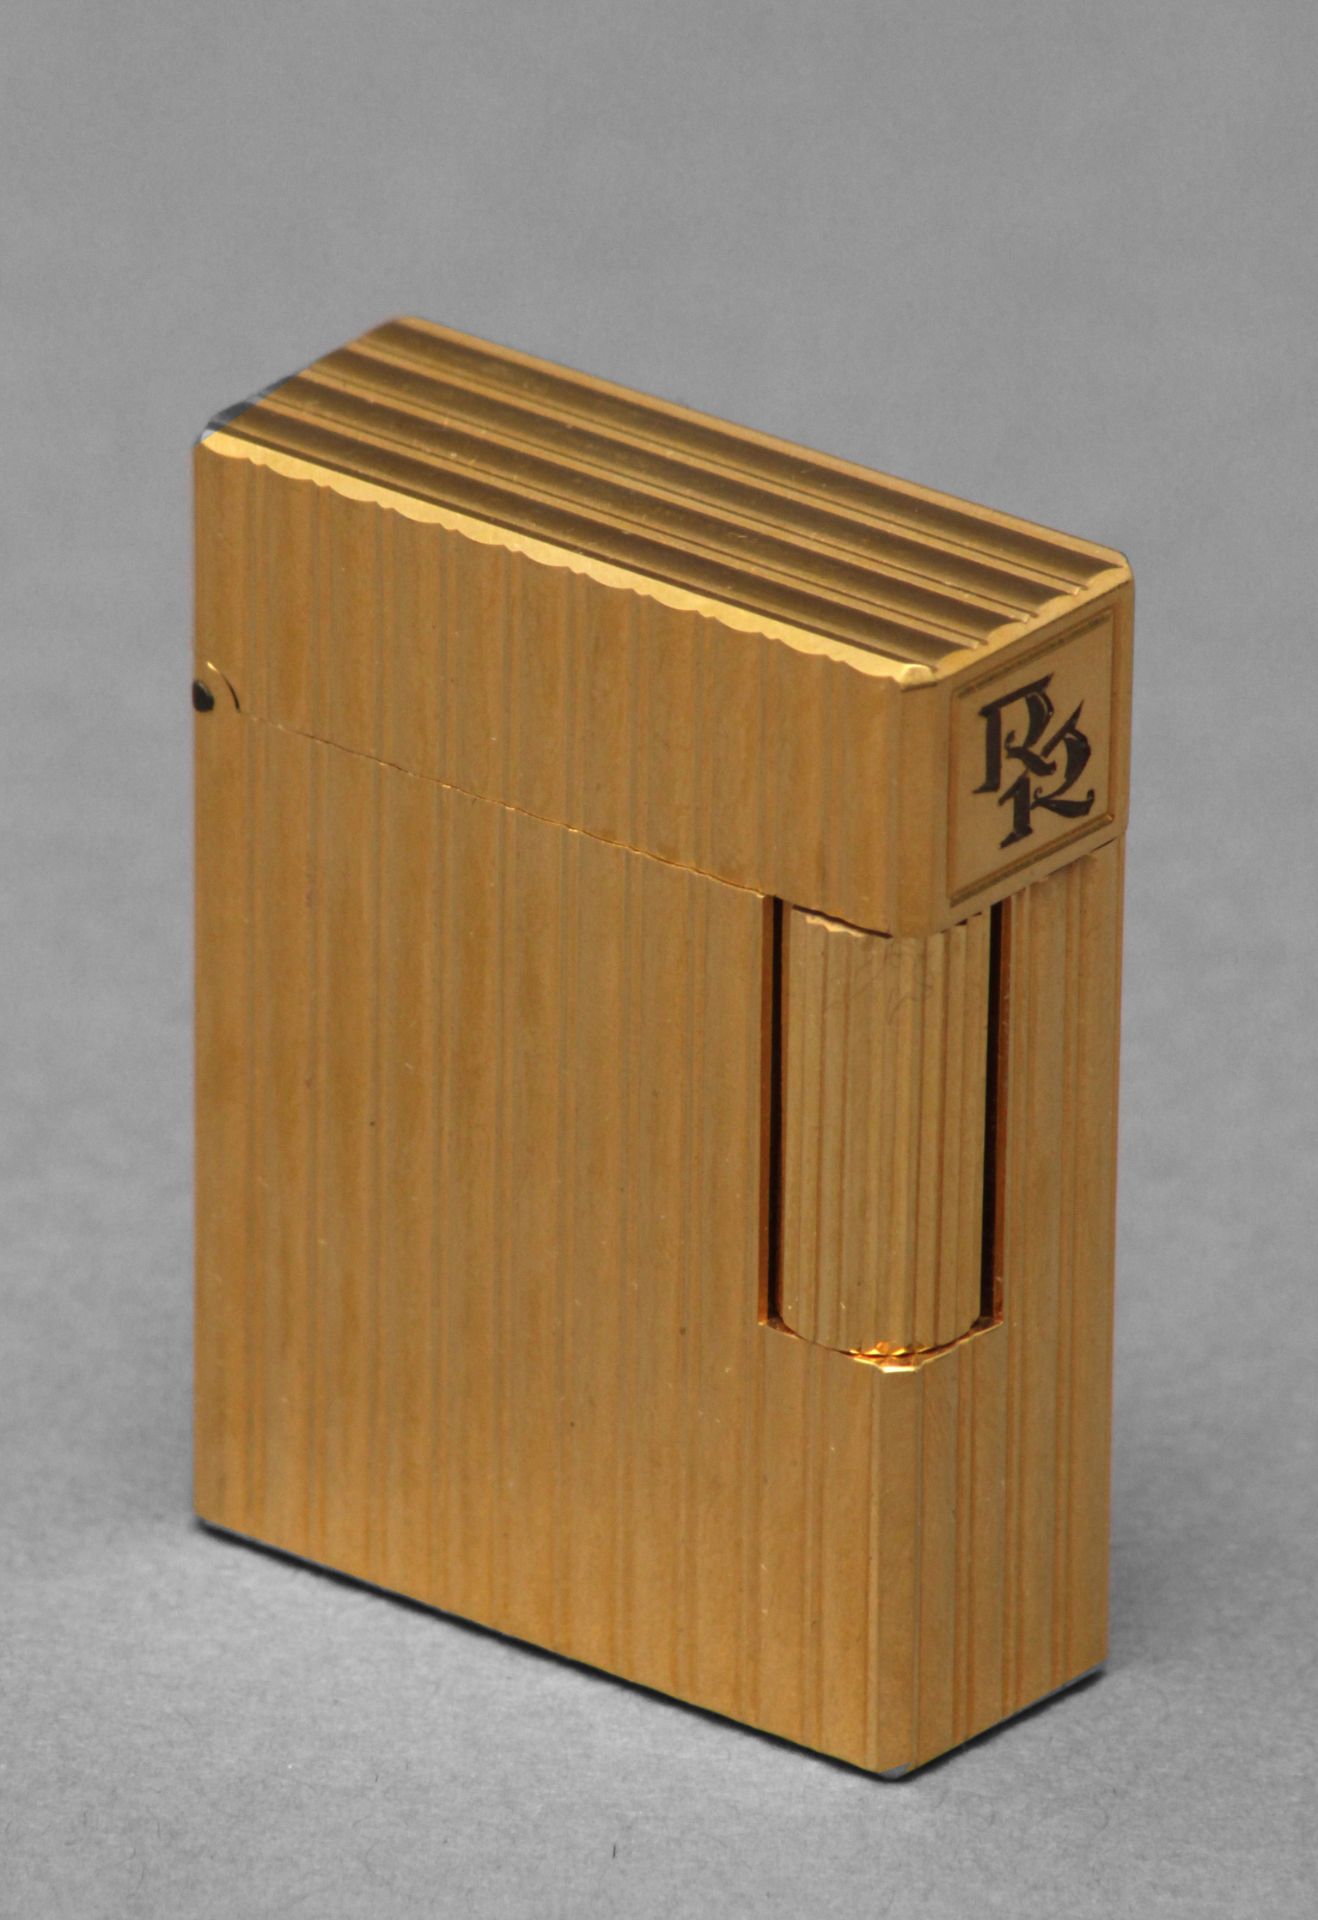 Dupont. A gold plated lighter